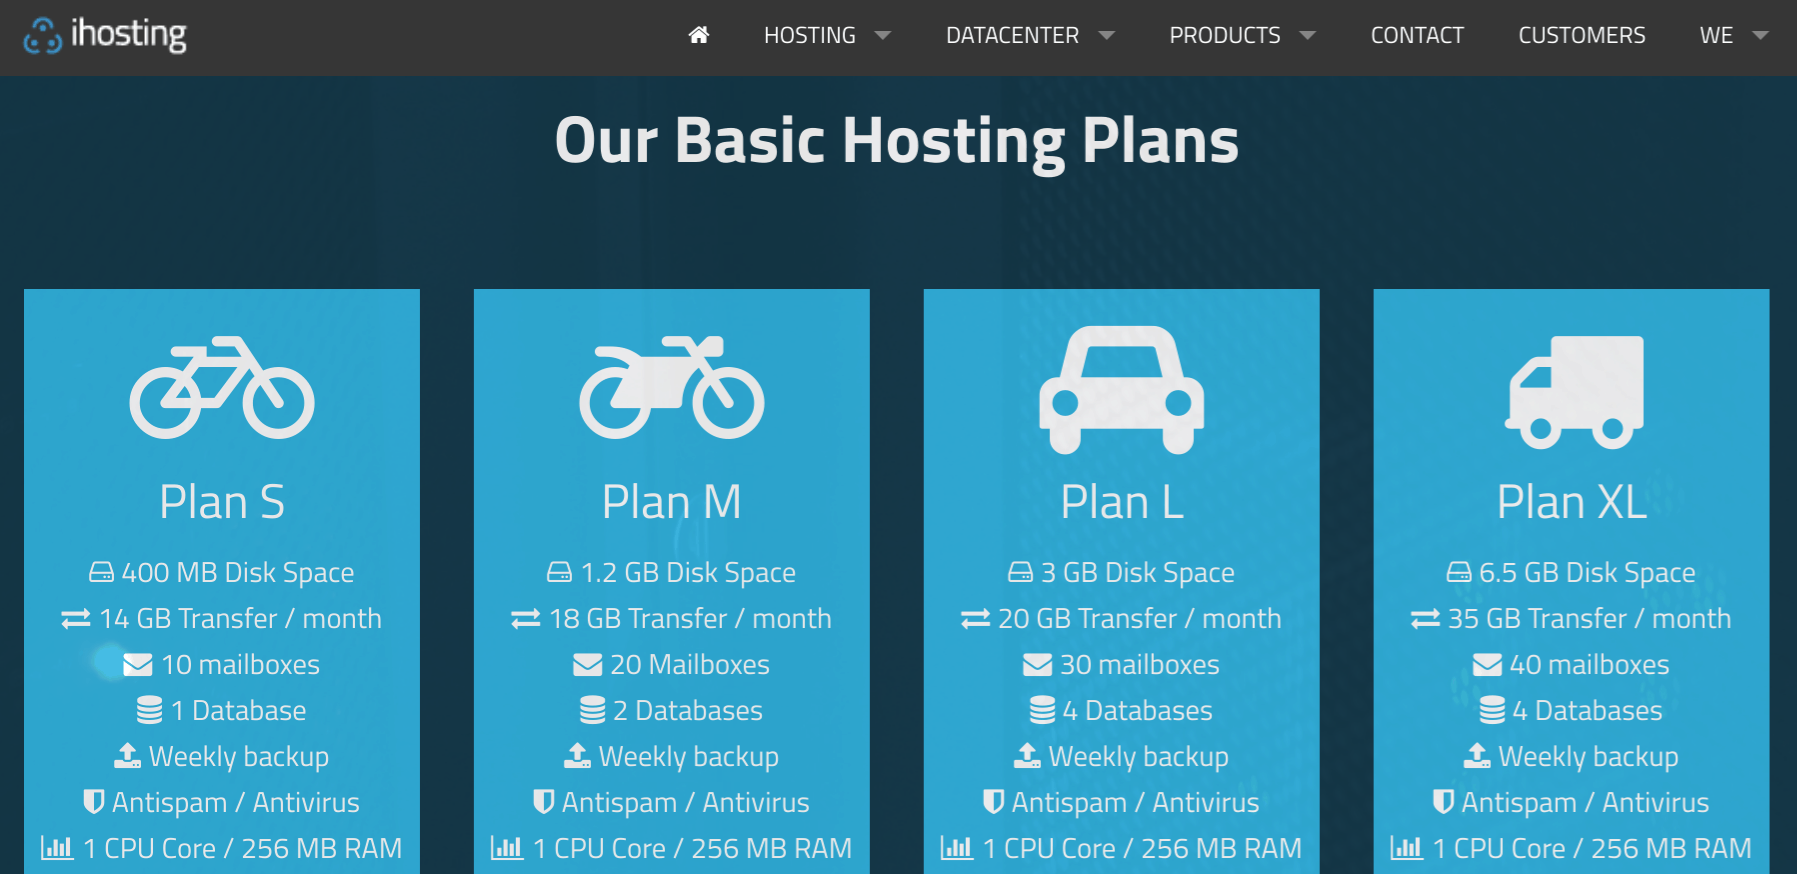 iHosting-overview1